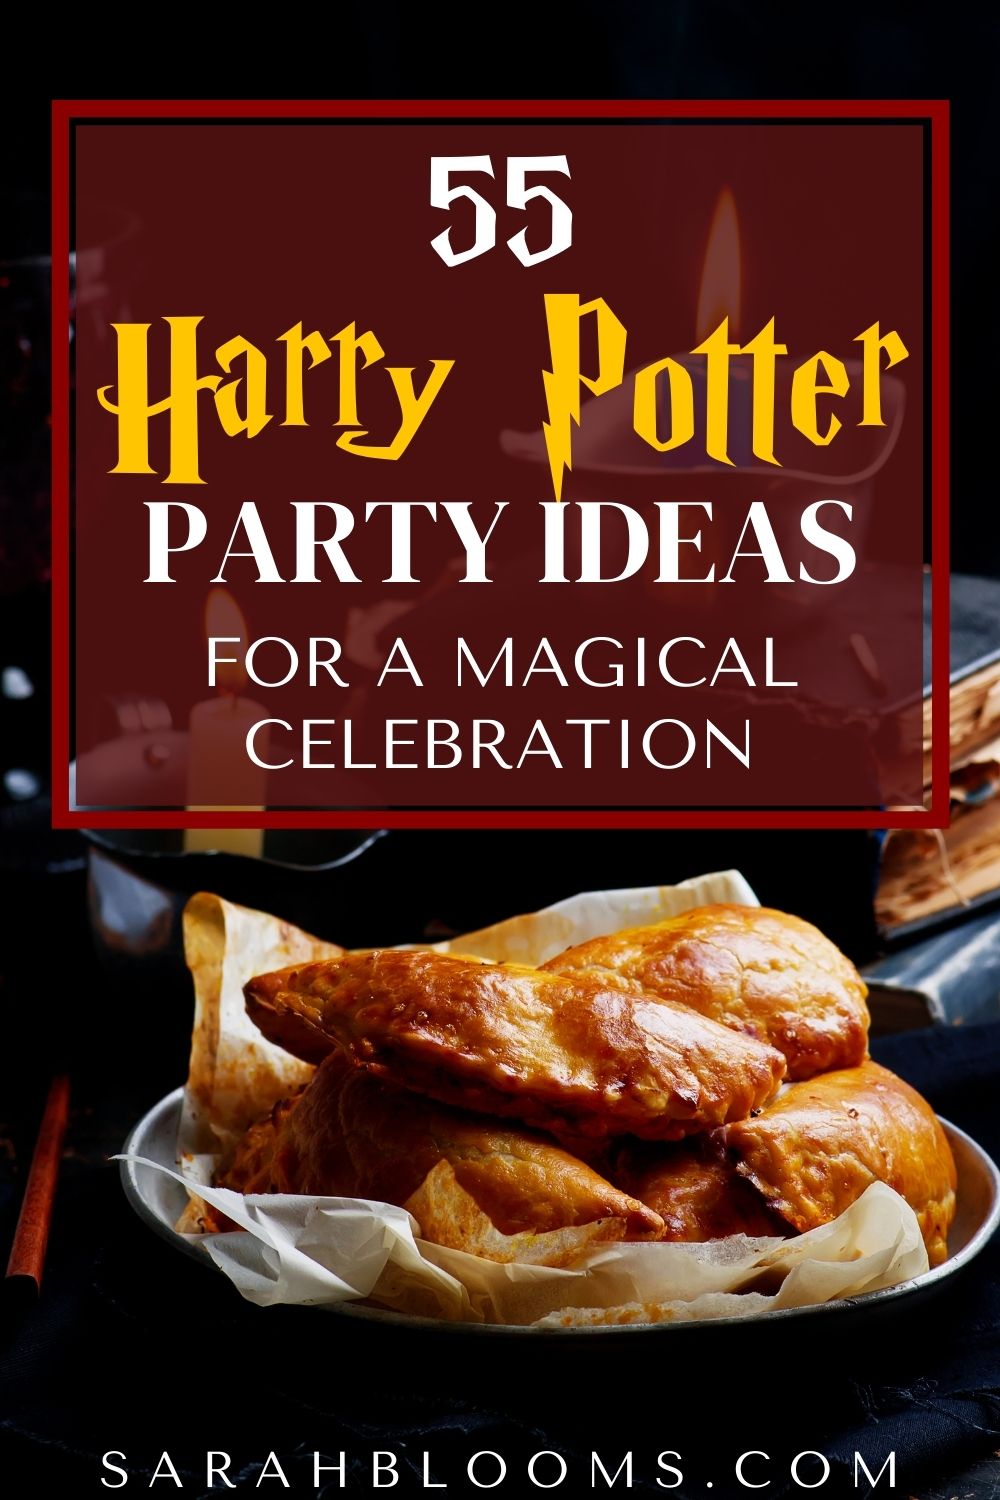 Throw the greatest Harry Potter Party ever with these 55 Ultimate Harry Potter Party Ideas that will wow your guests! #harrypotterparty #harrypotterpartyideas #harrypotter